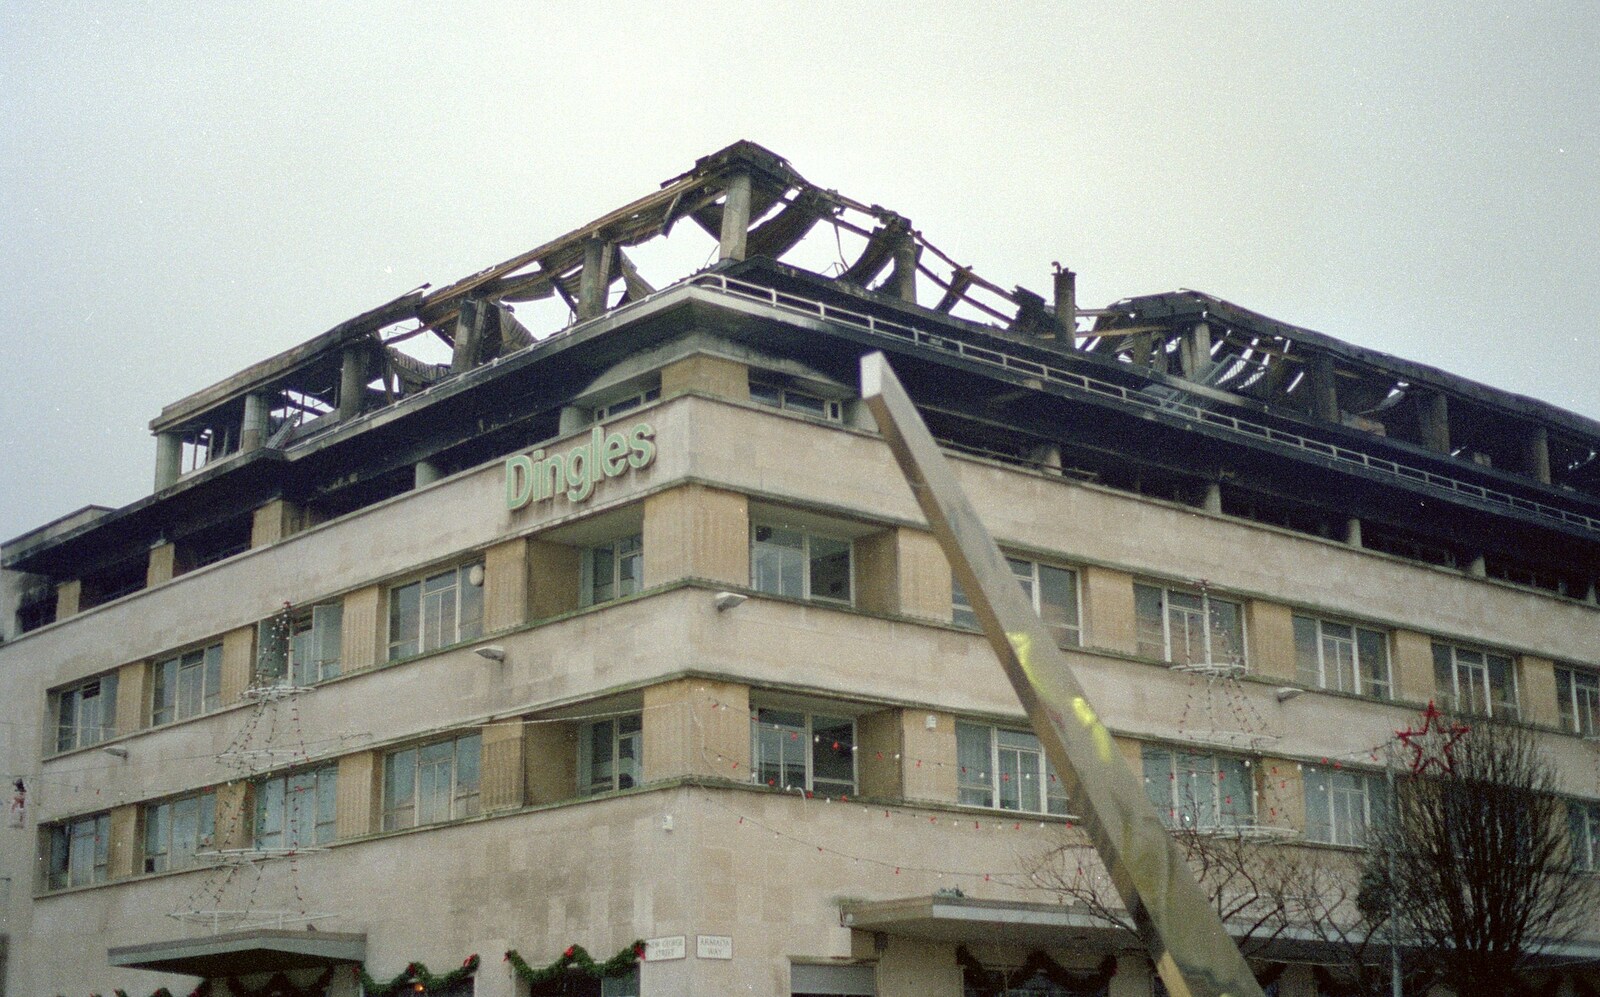 The next morning, the devastation is clear from Uni: The Fire-Bombing of Dingles, Plymouth, Devon - 19th December 1988